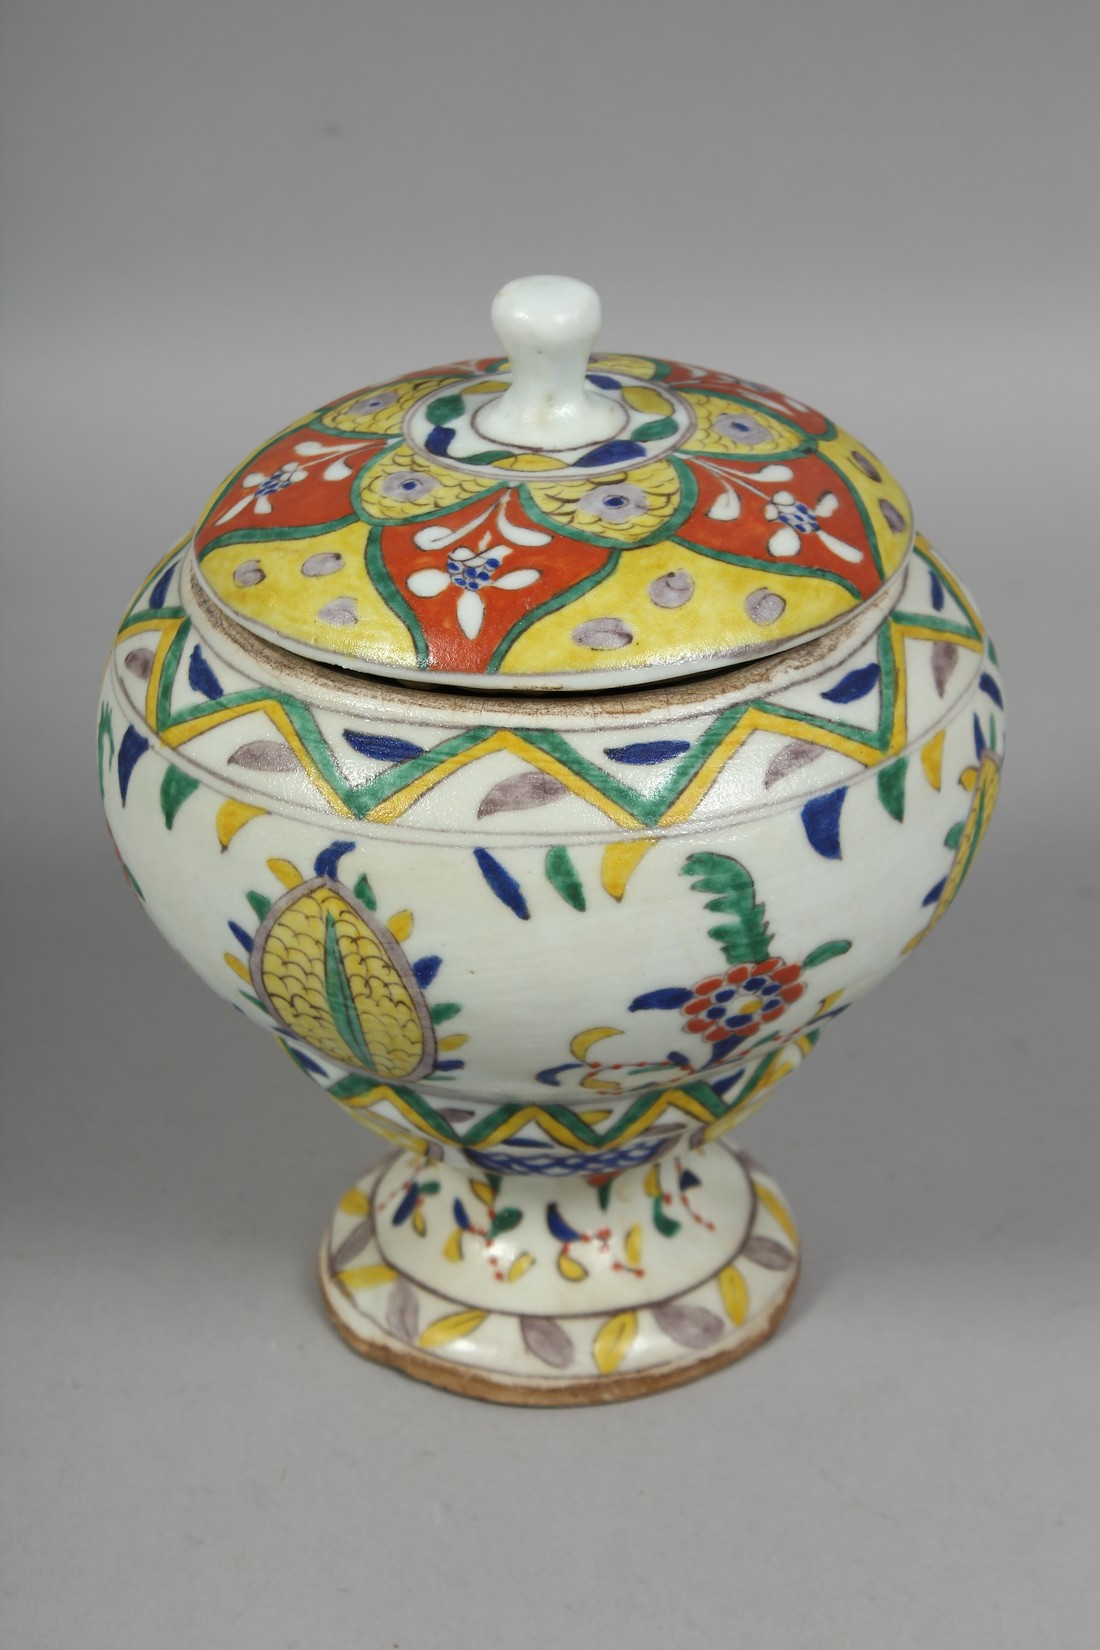 A TURKISH KUTAHYA POTTERY PEDESTAL SUGAR BOWL AND COVER, painted with various floral motifs, overall - Image 3 of 8